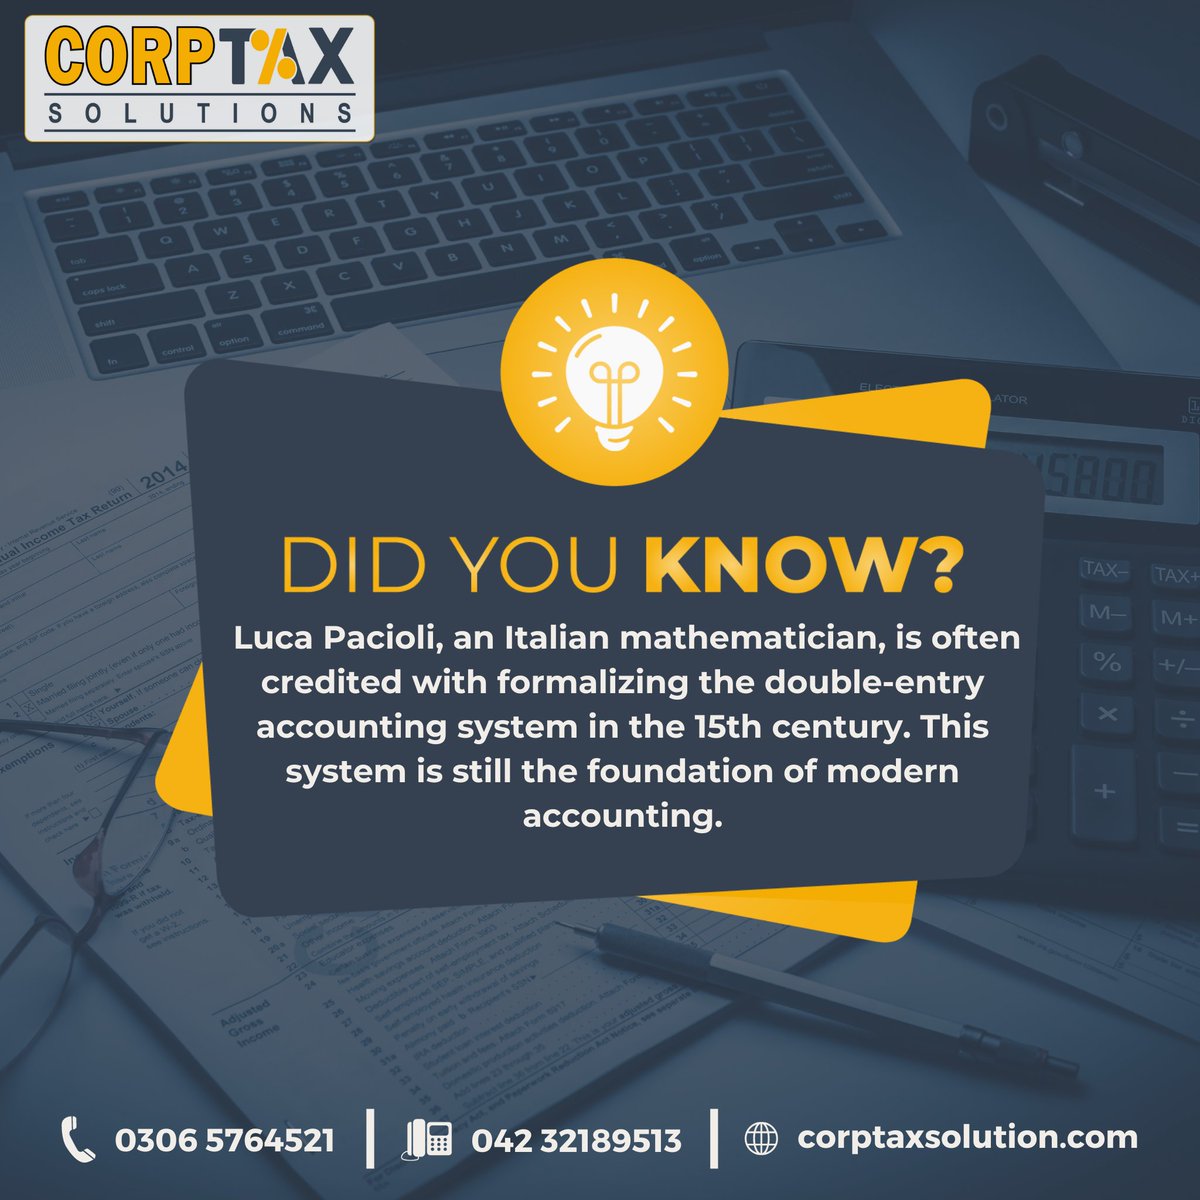 Interesting fact 📝

Luca Pacioli, A founder of double-entry accounting system in the 15th century.
.
.
#Corptax #TaxConsultant #TaxFacts #accounting #history #modernaccounting #financialaccounting #accountinghistory #taxfact #bookkeeping #accountingservices #bookkeeper #callnow